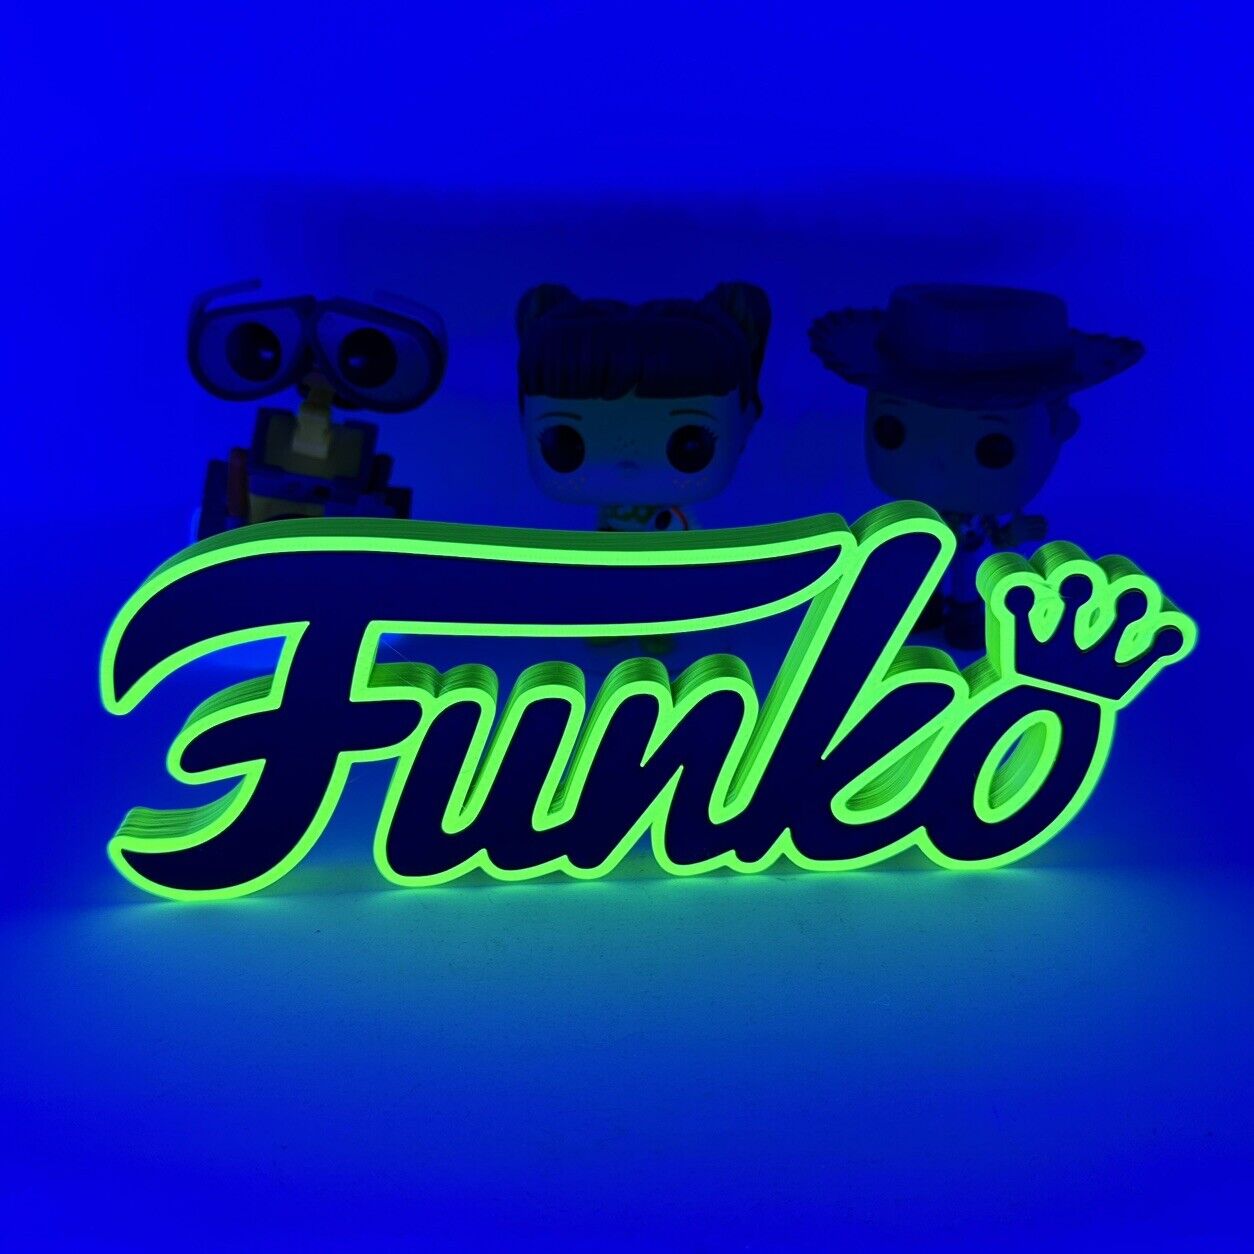 3D Printed BLACK LIGHT - 8.6 INCH - FUNKO Fan Sign (GREEN) for your Funko Pops